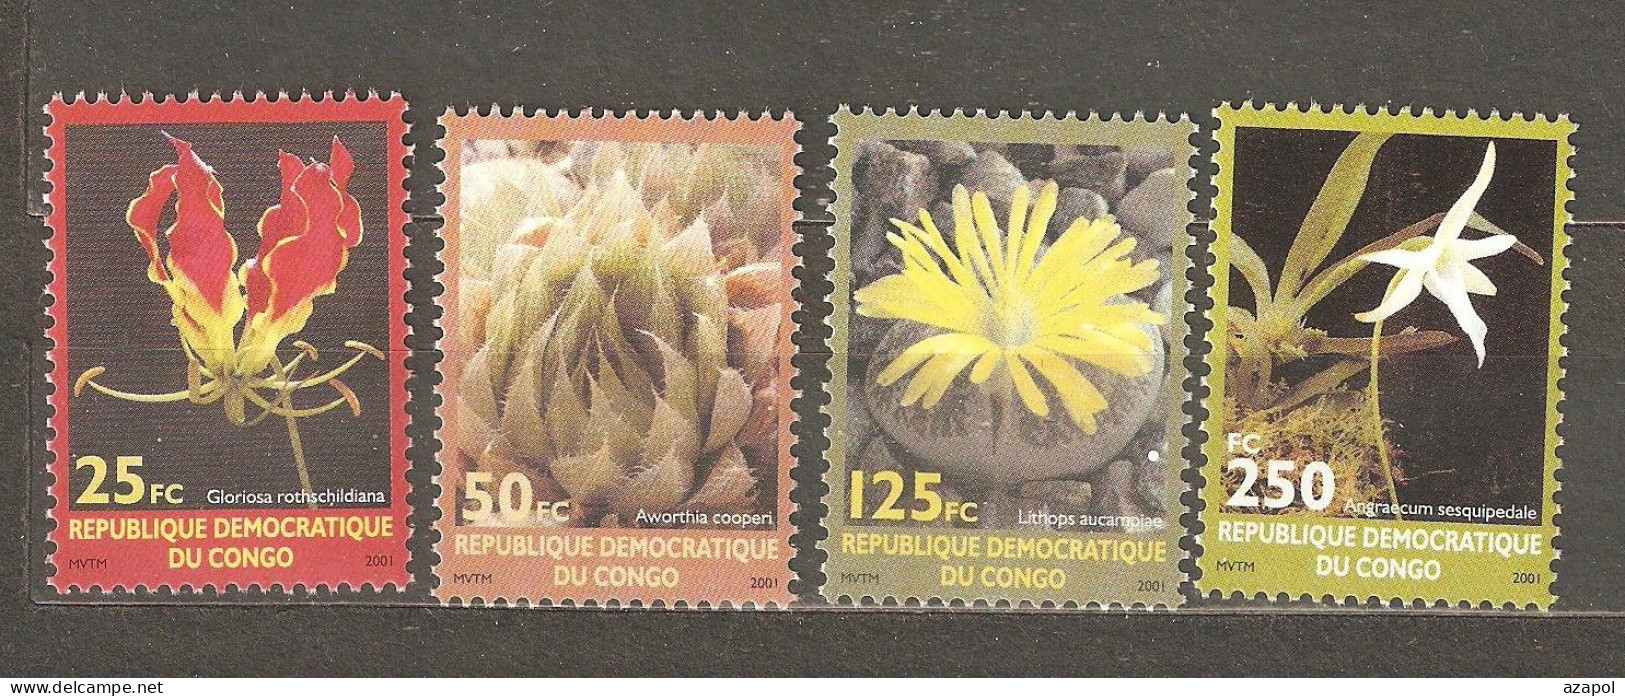 Congo: Full Set Of 4 Mint Stamps, Flowering Plants, 2002, Mi#1698-1701, MNH - Mint/hinged